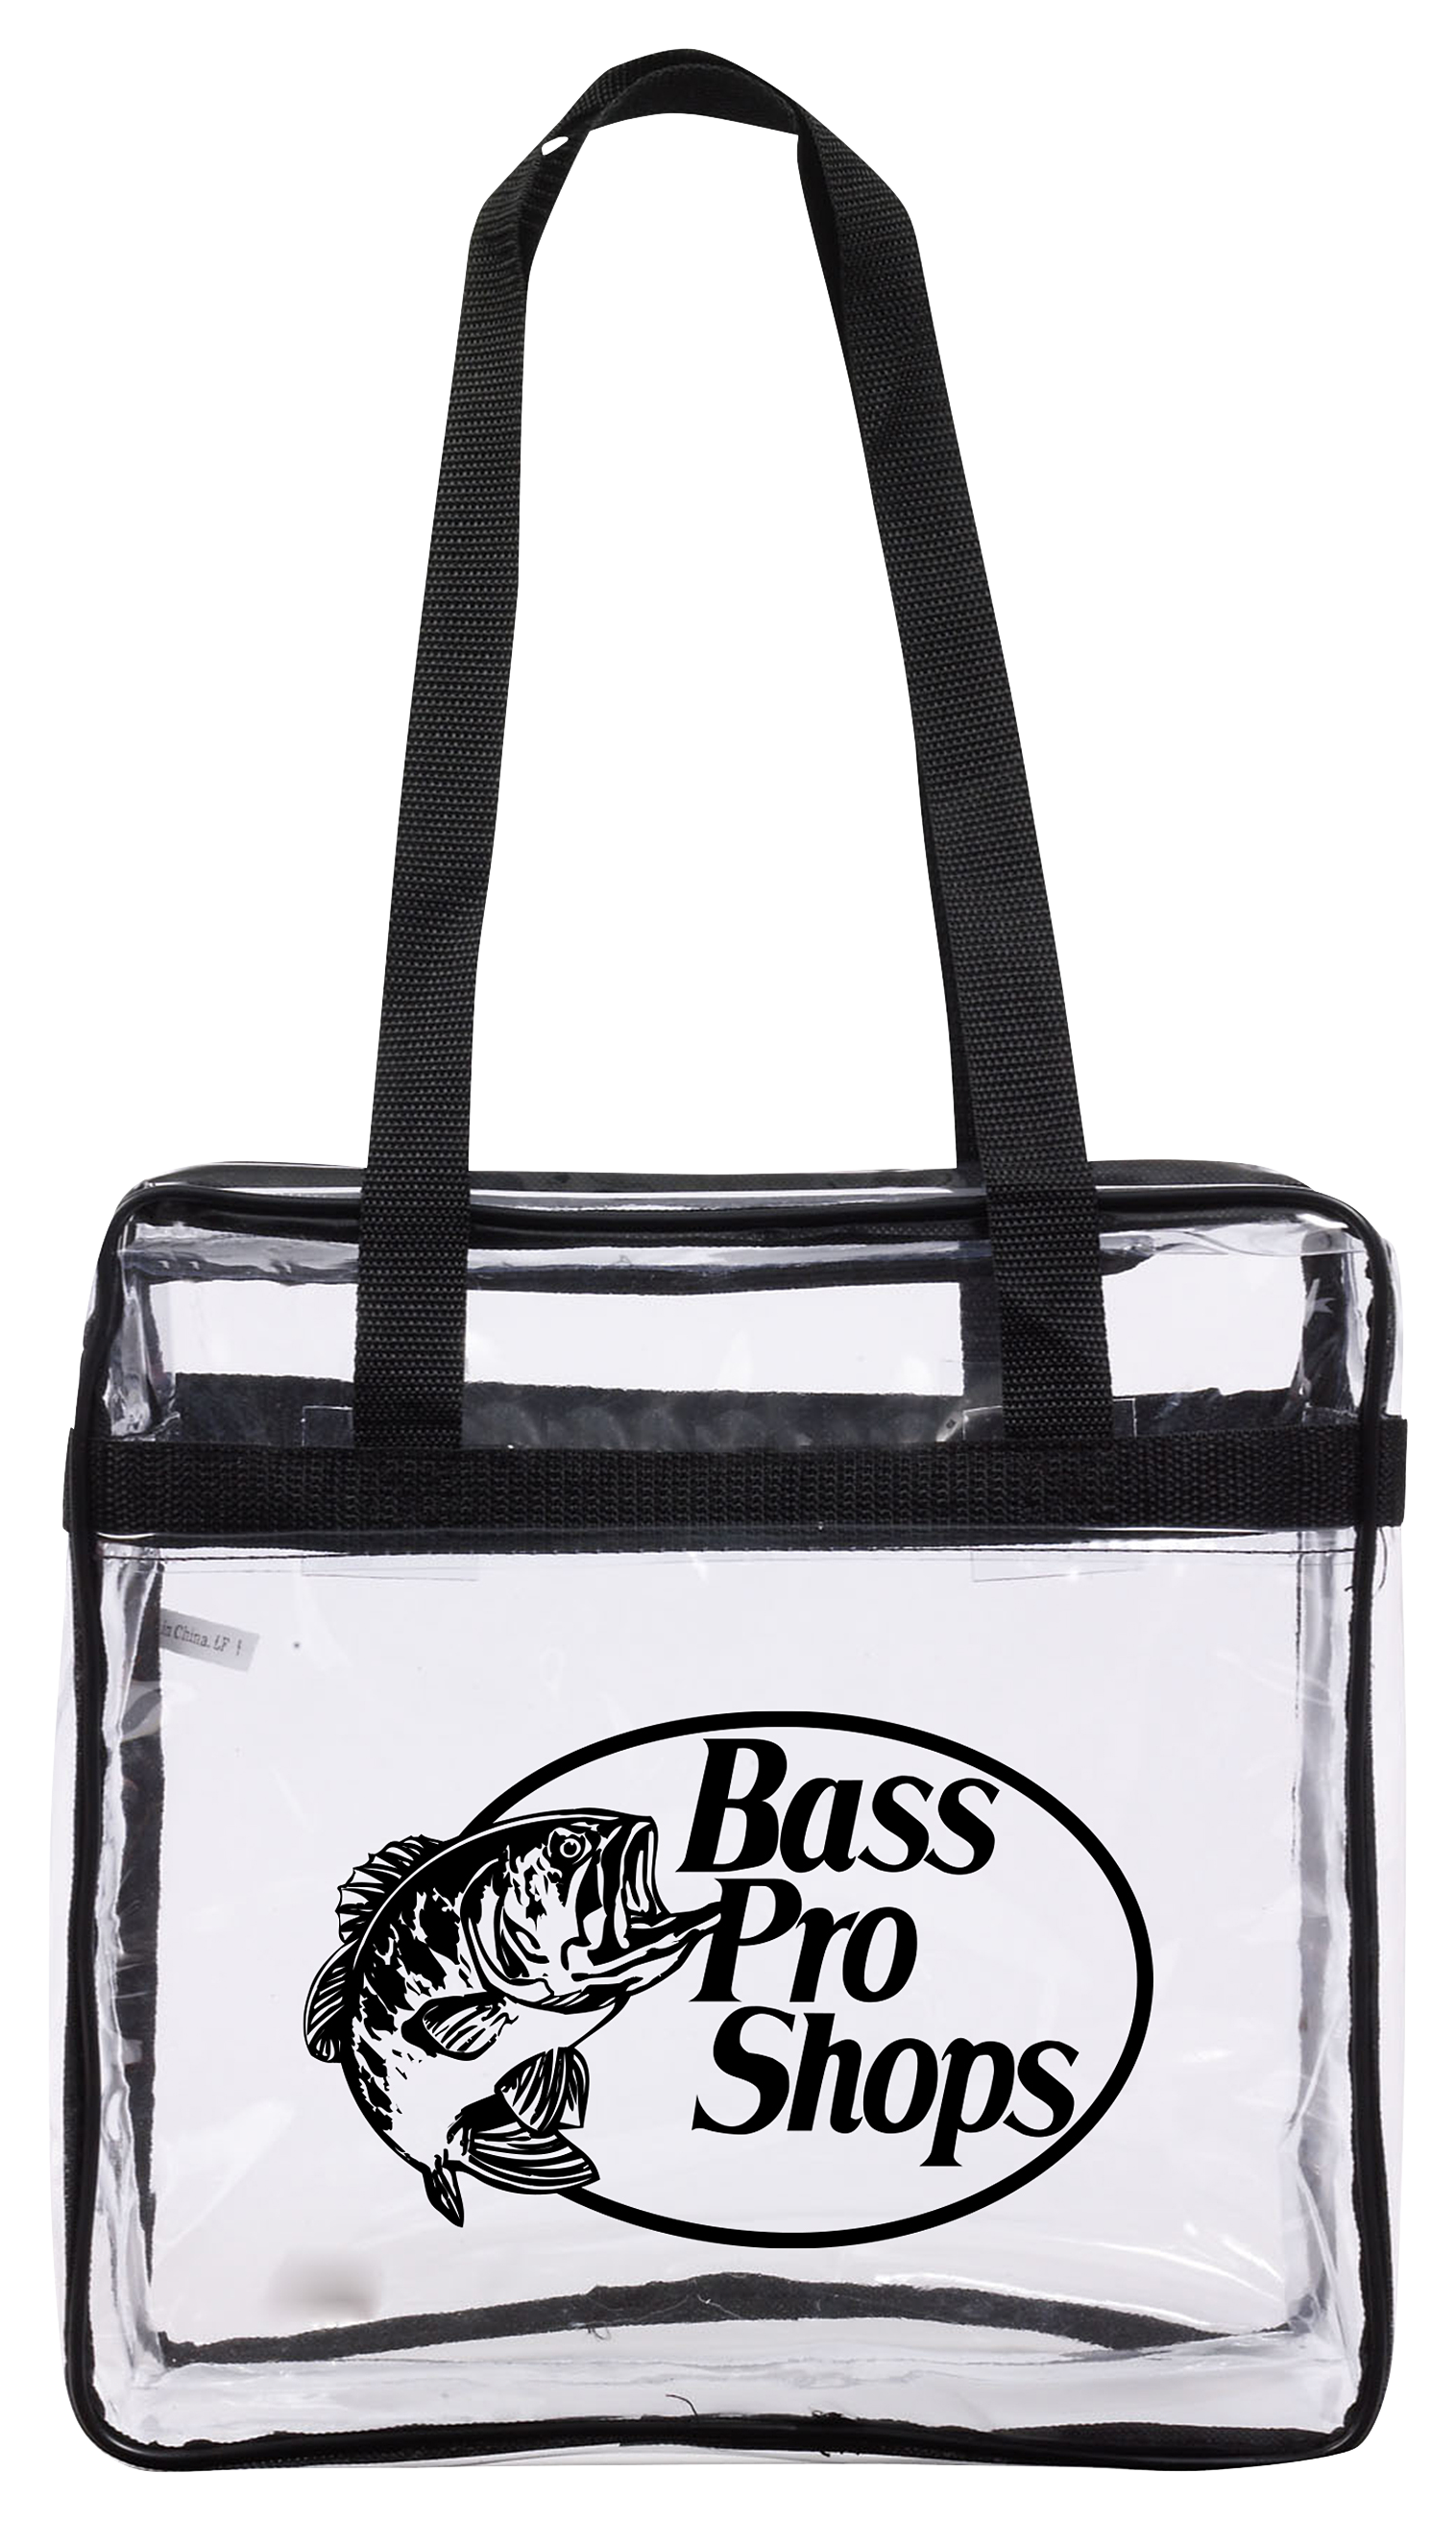 Bass Pro Shops Logo Clear Zippered Tote Bag